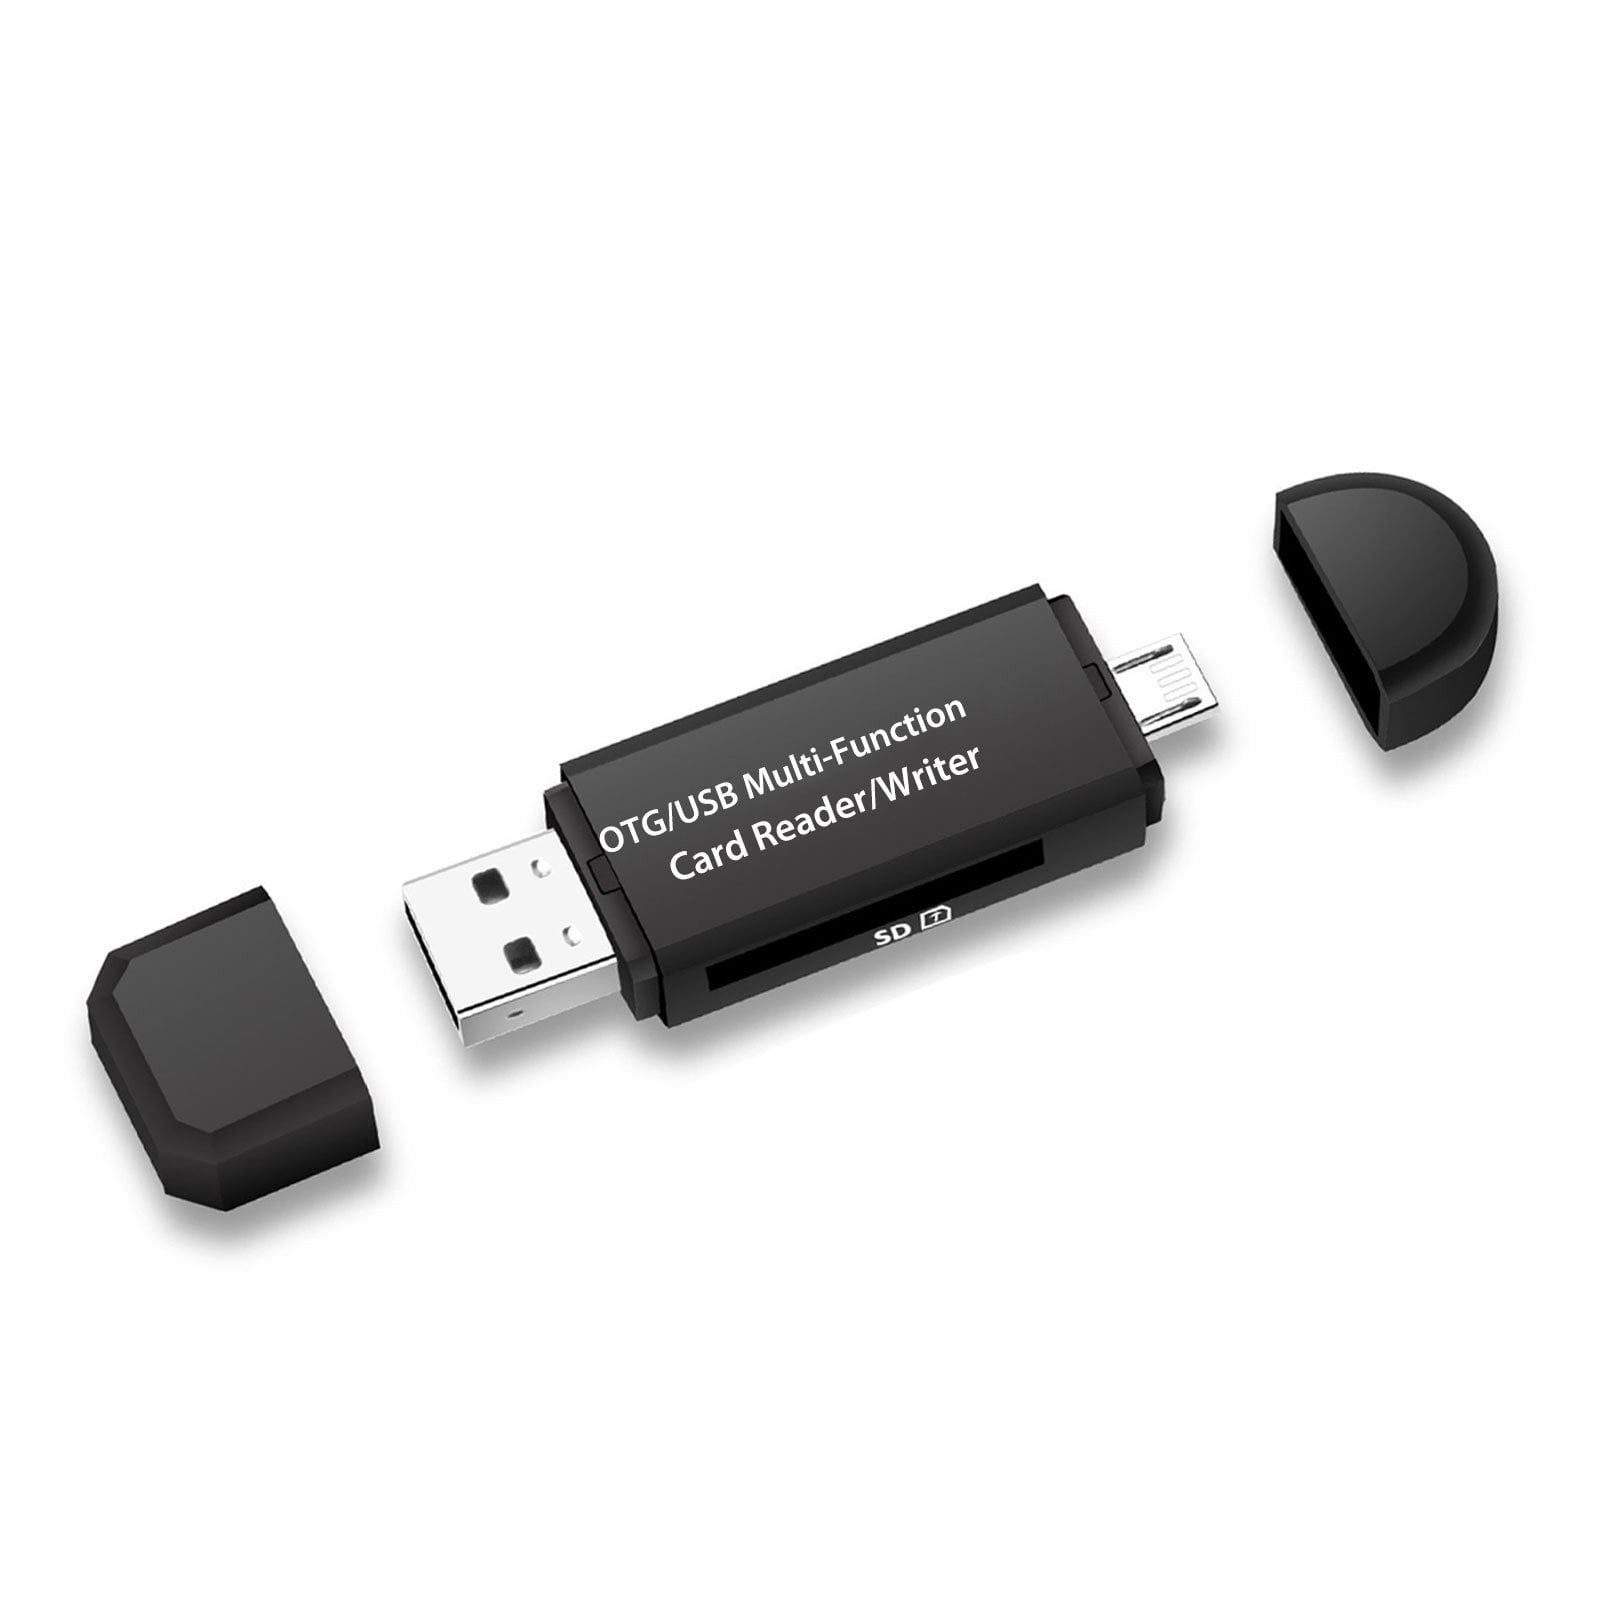 USB SD Card Reader, TSV Micro USB 2.0 OTG Adapter Memory Card Reader for SD/Micro  SD/TF/SDXC/SDHC/MMC/RS-MMC/Microsdhc/Microsdxc, Camera Flash Card Reader  Support Windows, Linux, Mac OS, Android 